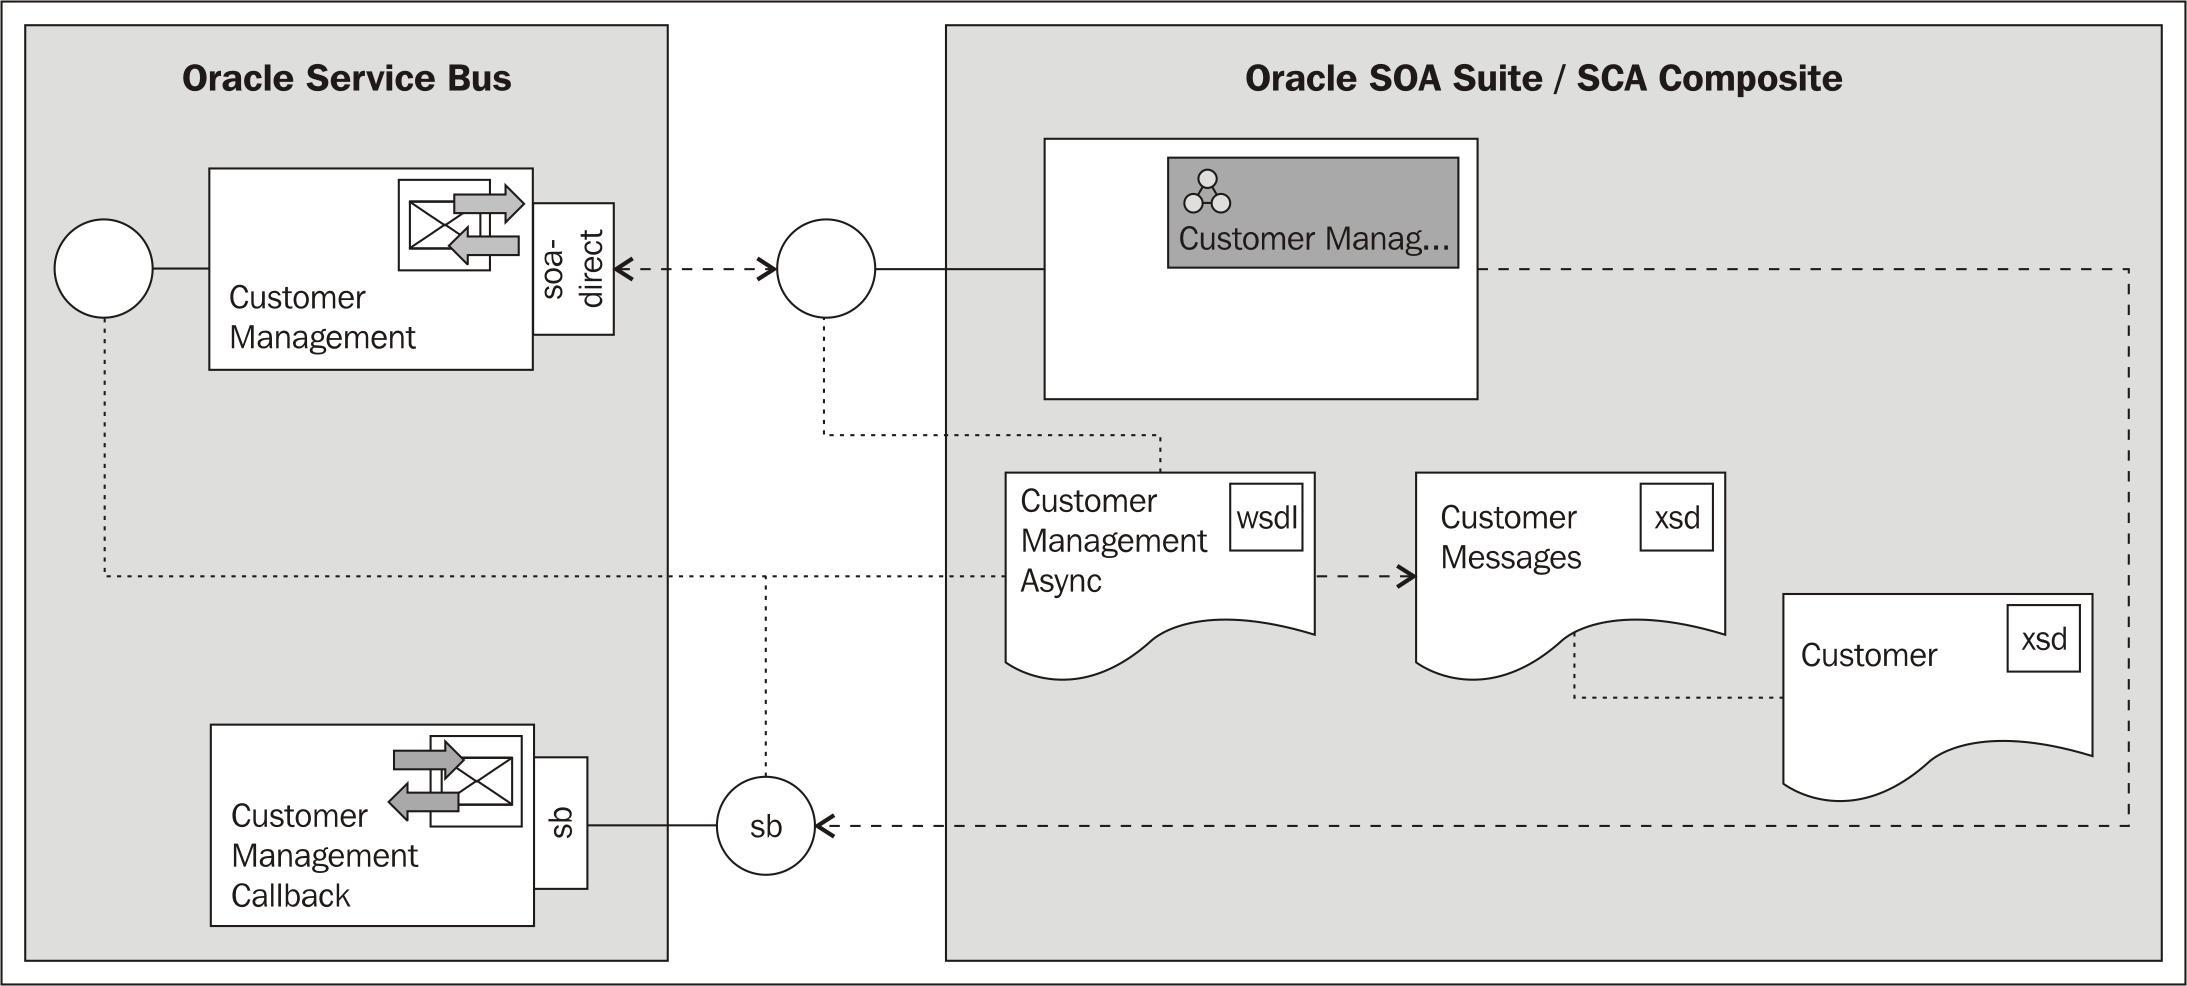 Invoking a SCA composite asynchronously from an OSB service